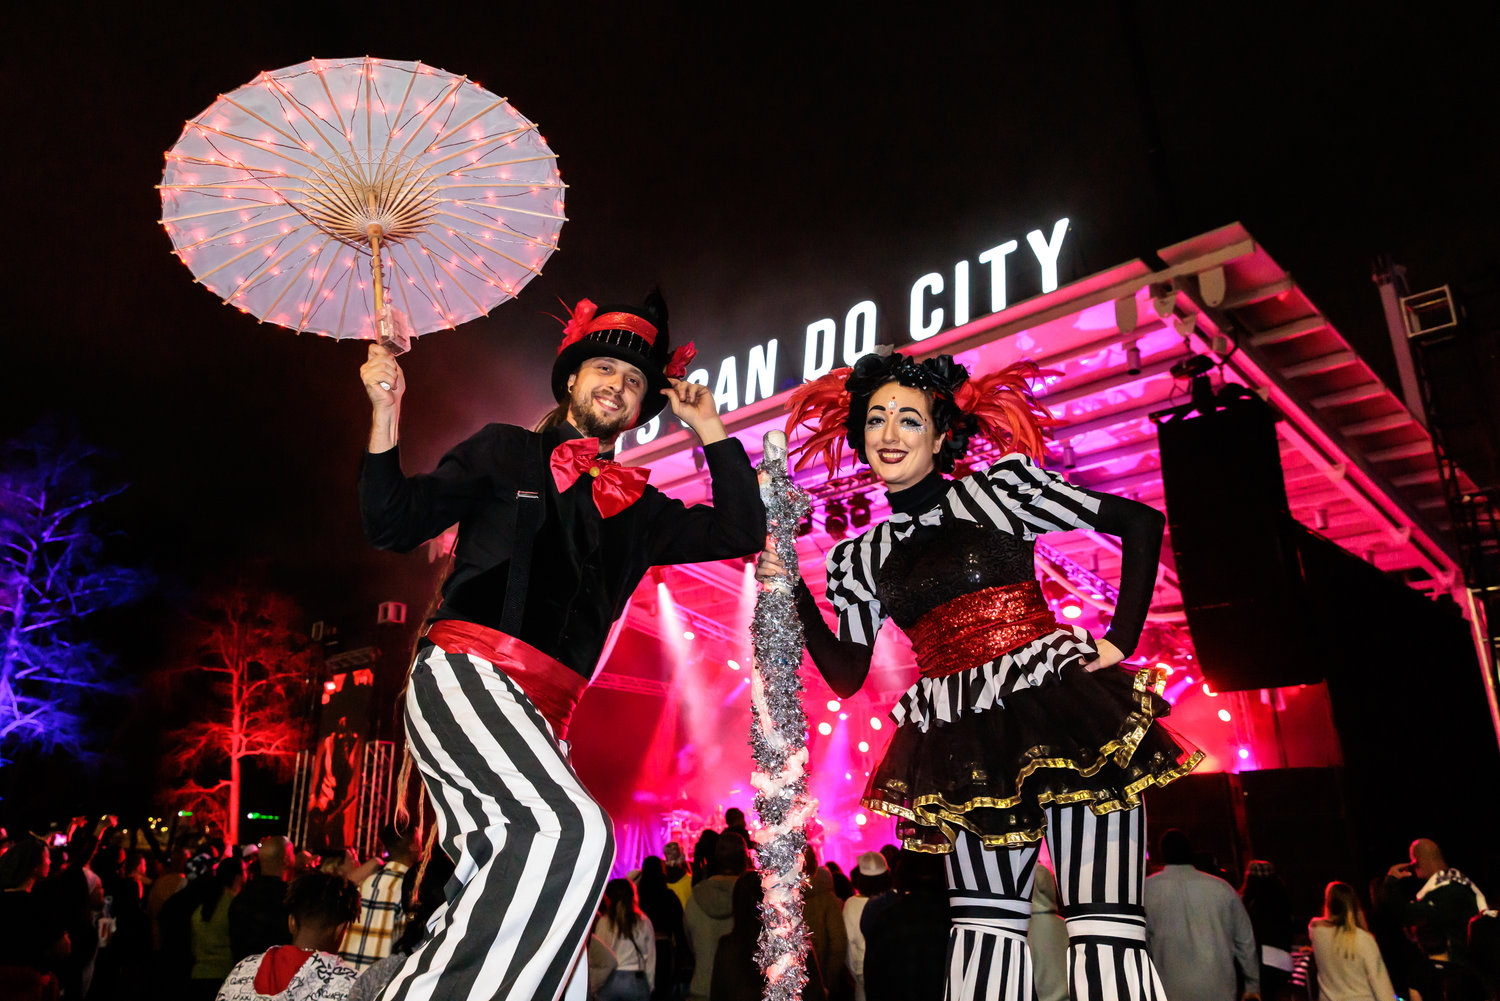 Stilt walkers, fire dancers and magicians added to the carnival-like atmosphere of Night Circus: A District New Year’s Eve Spectacular in Festival Park on Saturday.